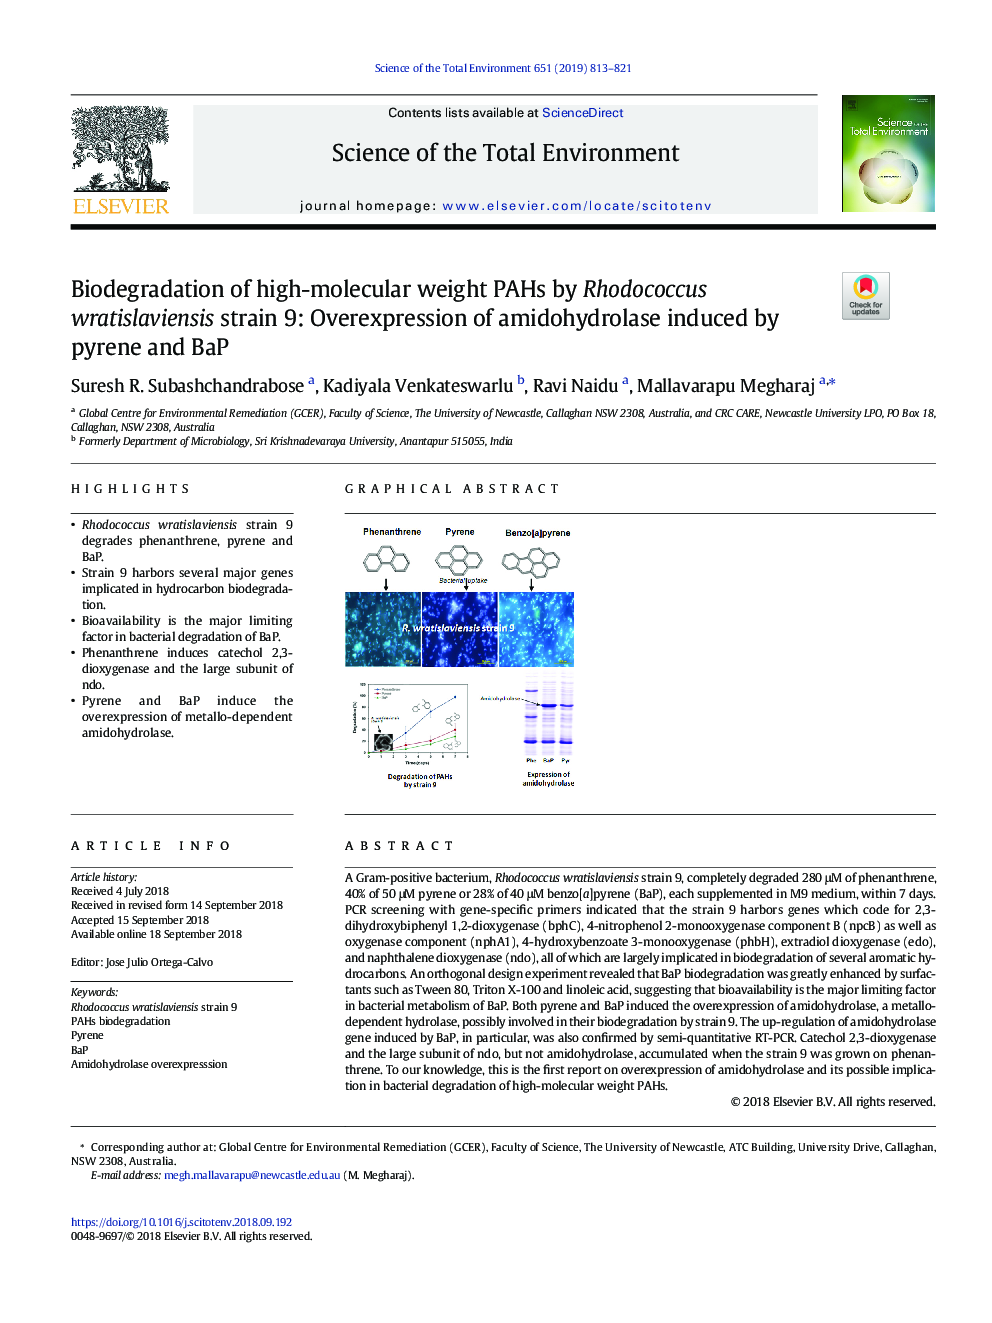 Biodegradation of high-molecular weight PAHs by Rhodococcus wratislaviensis strain 9: Overexpression of amidohydrolase induced by pyrene and BaP